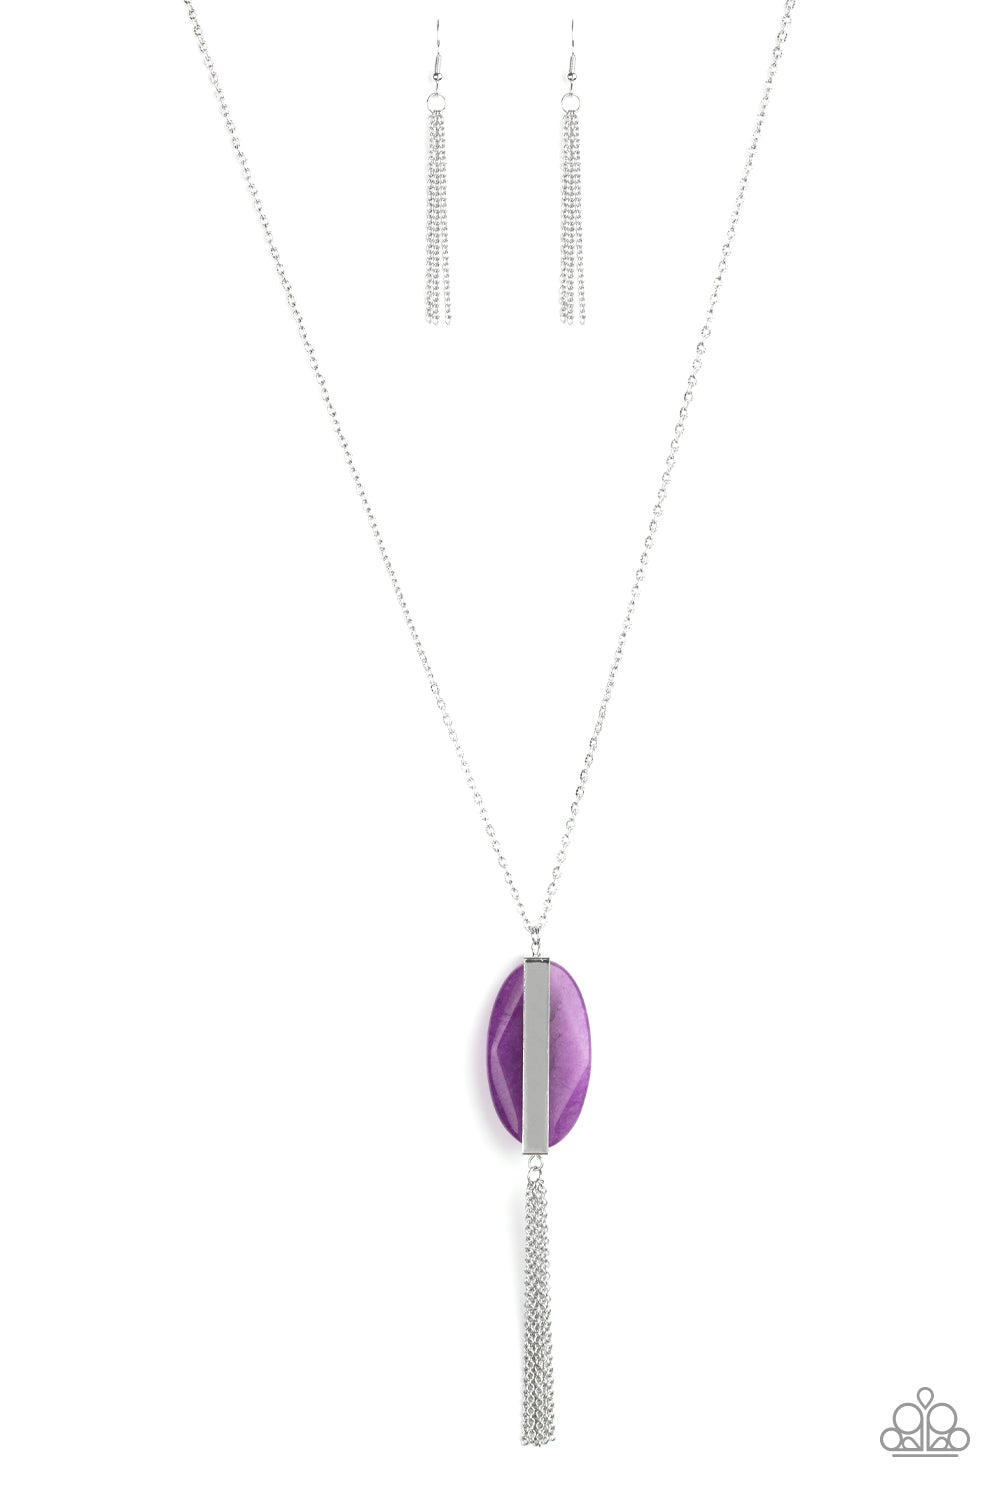 Threaded through a rod, an ethereal purple stone sits inside a rectangular silver fitting, giving way to a shimmery silver chain tassel for a tranquil finish. Features an adjustable clasp closure.